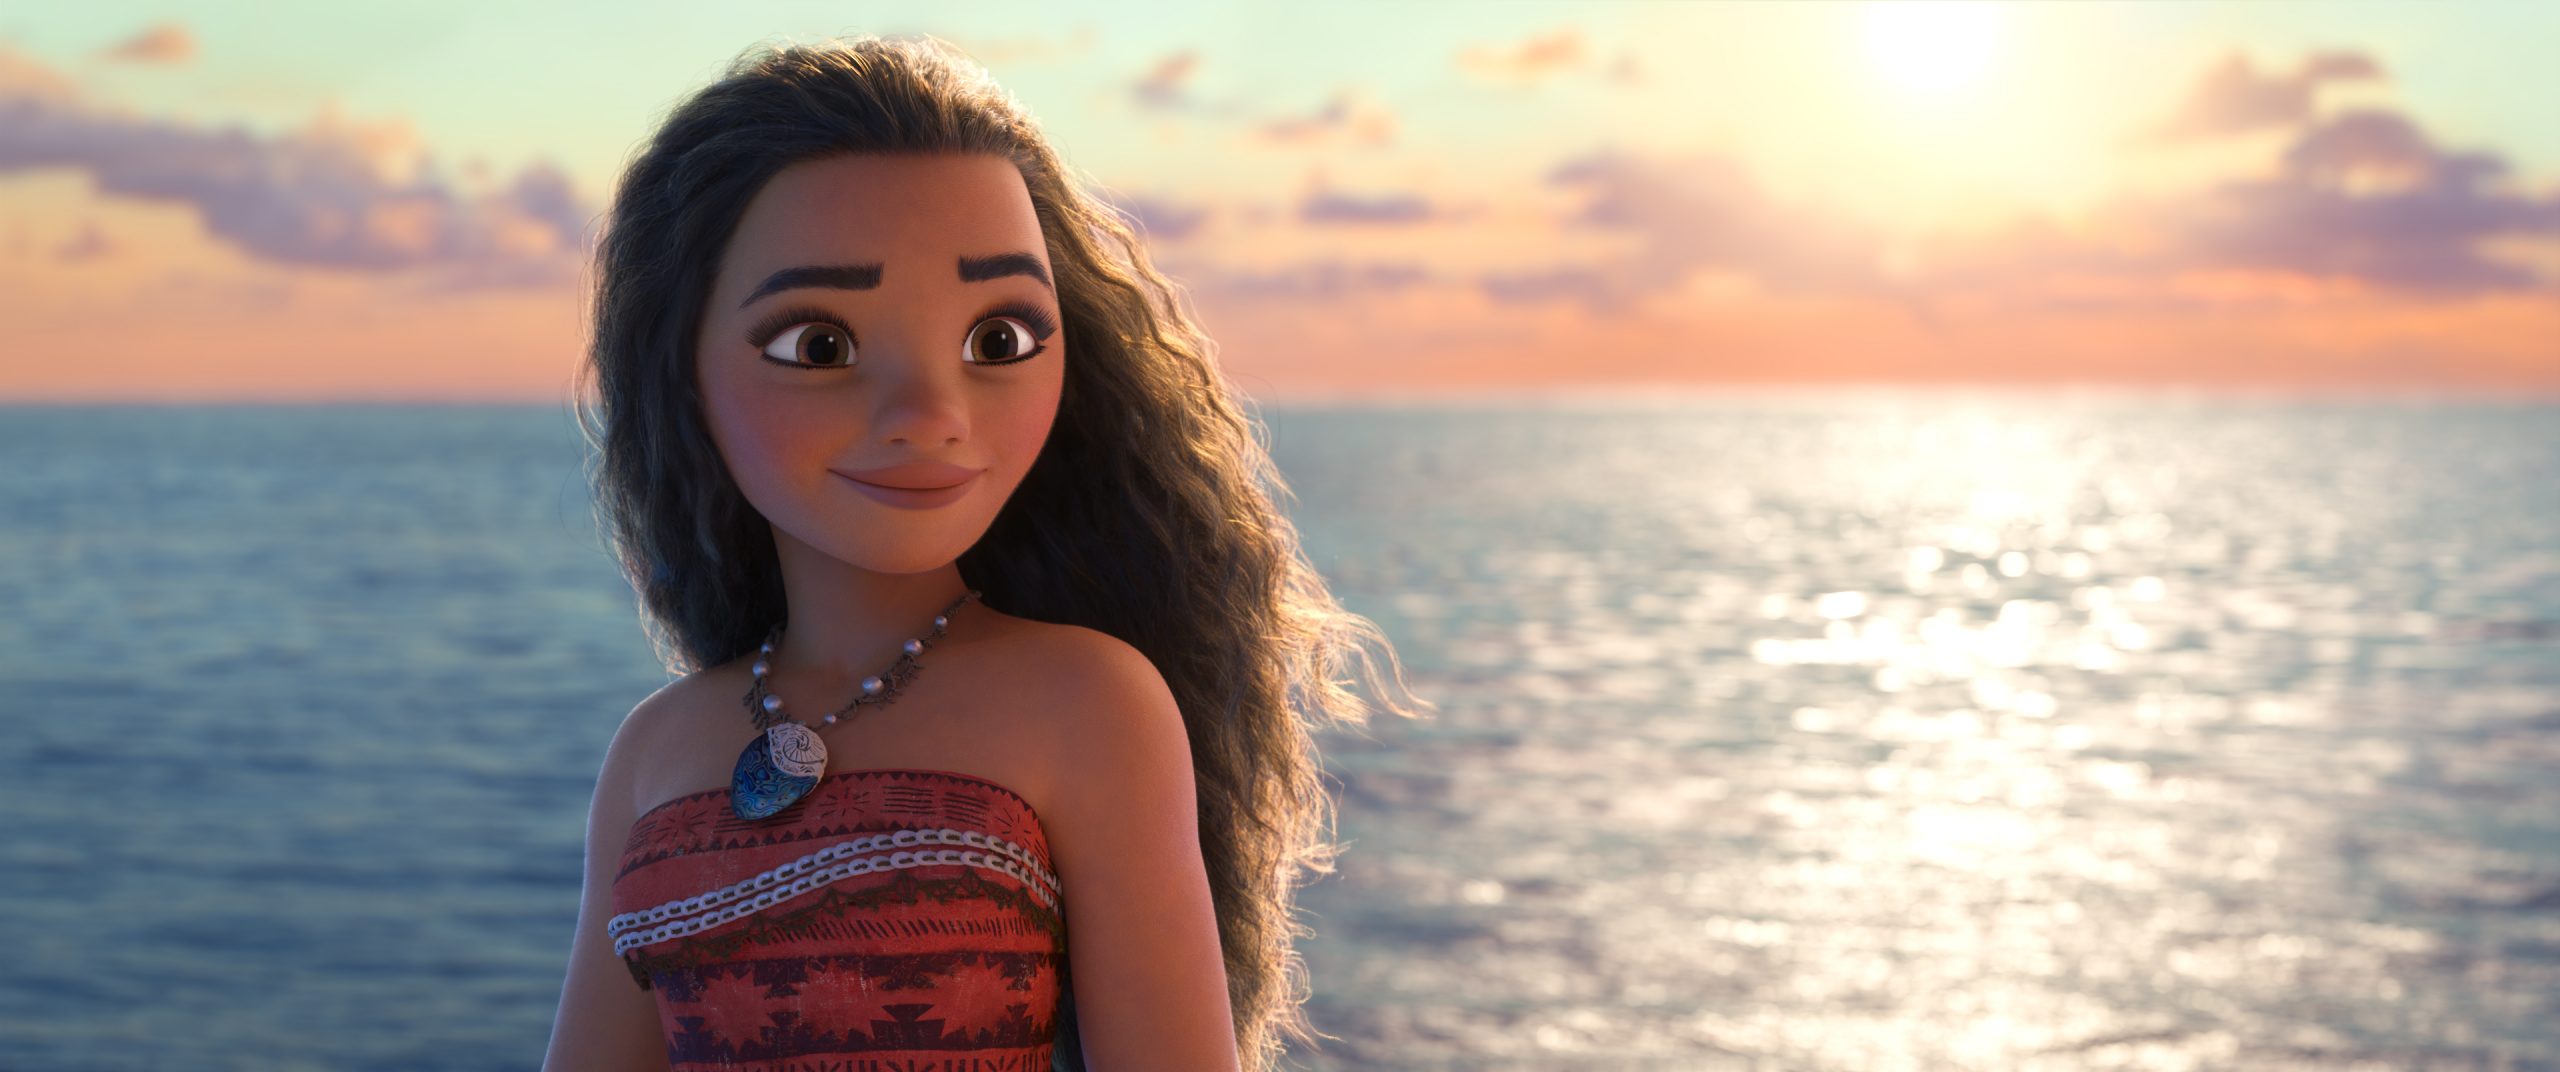 Photo of Review: 'Moana' Cements a Redefinition of the Disney Princess Film